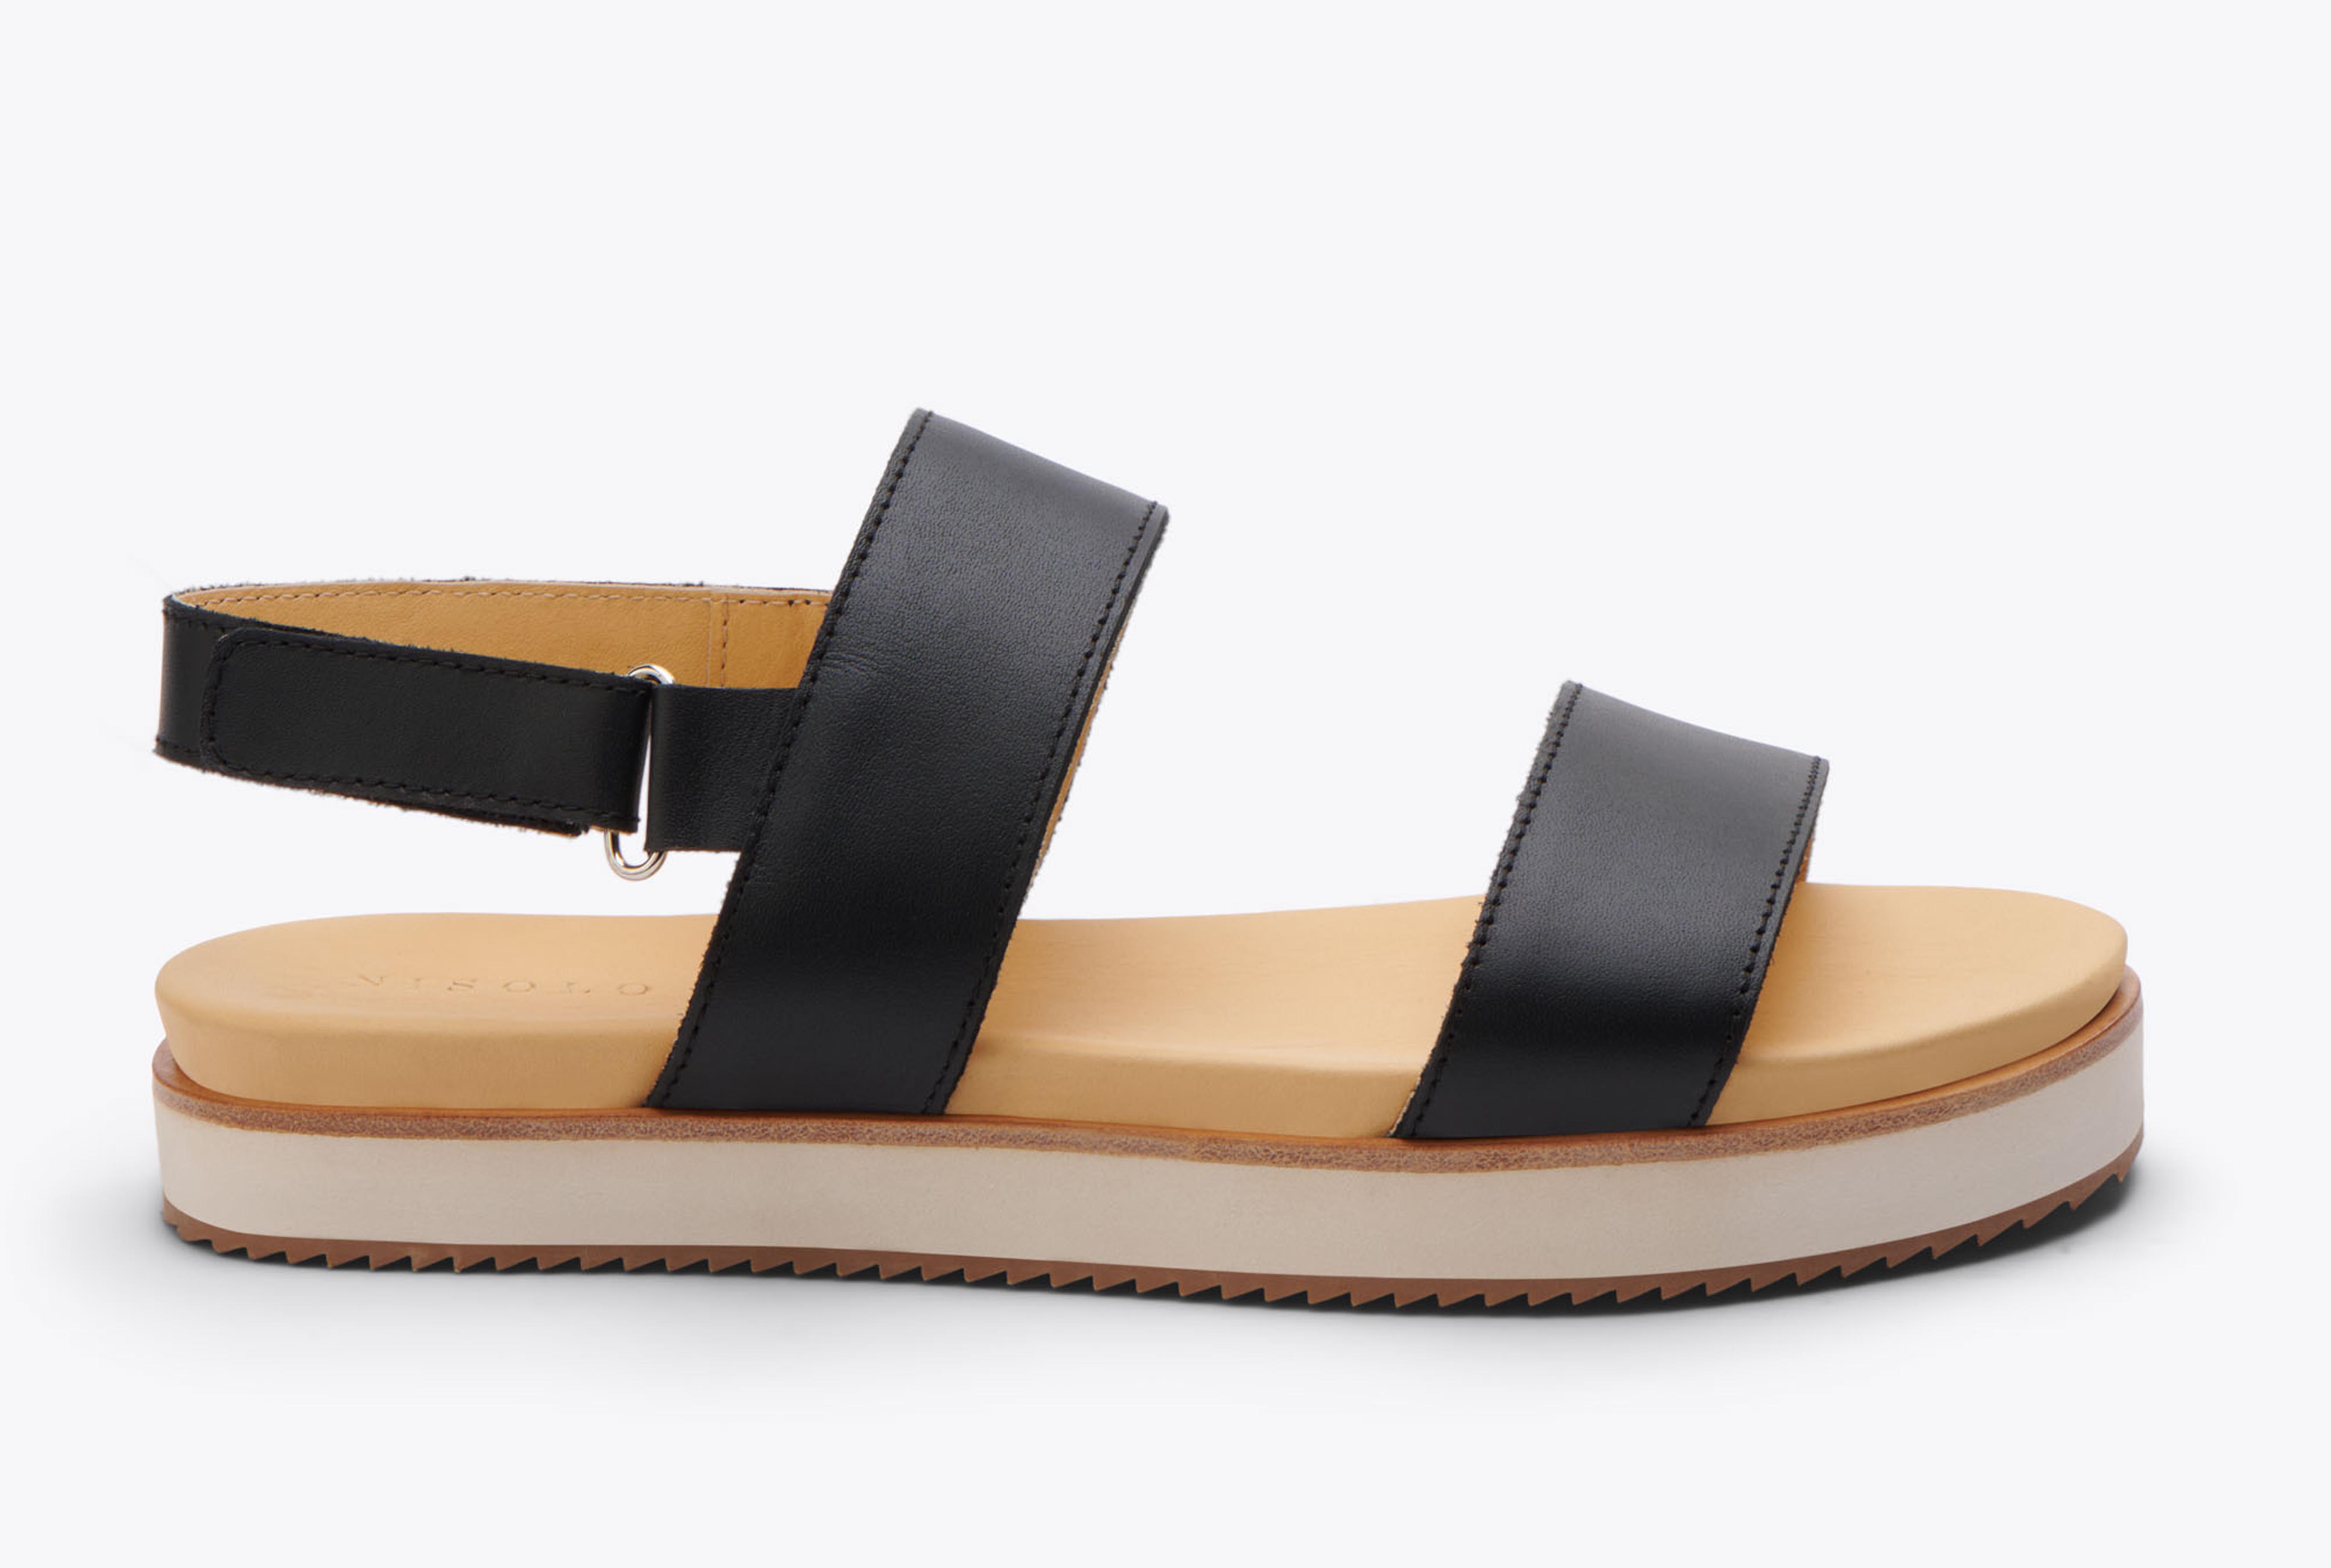 Nisolo Go-To Flatform Sandal Black - Every Nisolo product is built on the foundation of comfort, function, and design. 